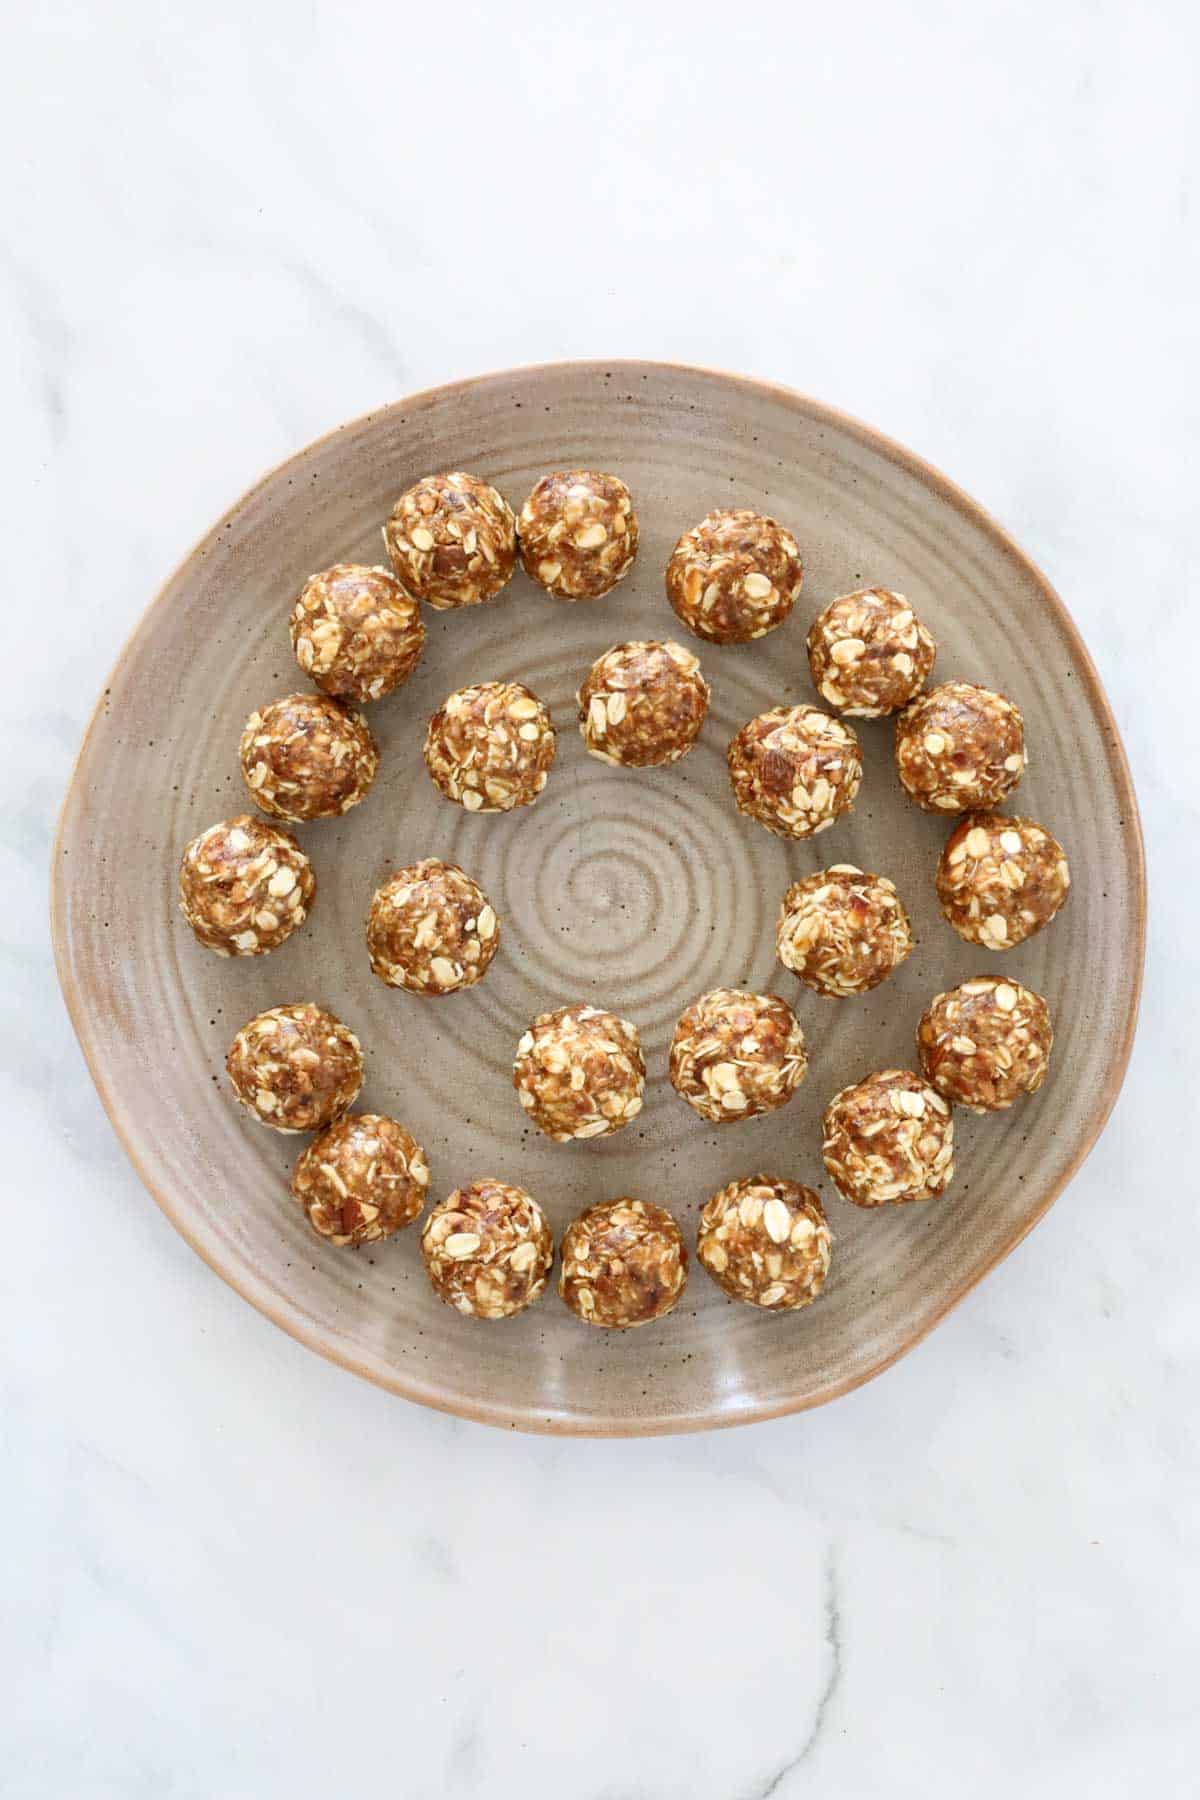 Looking down on a plate of rolled protein balls.